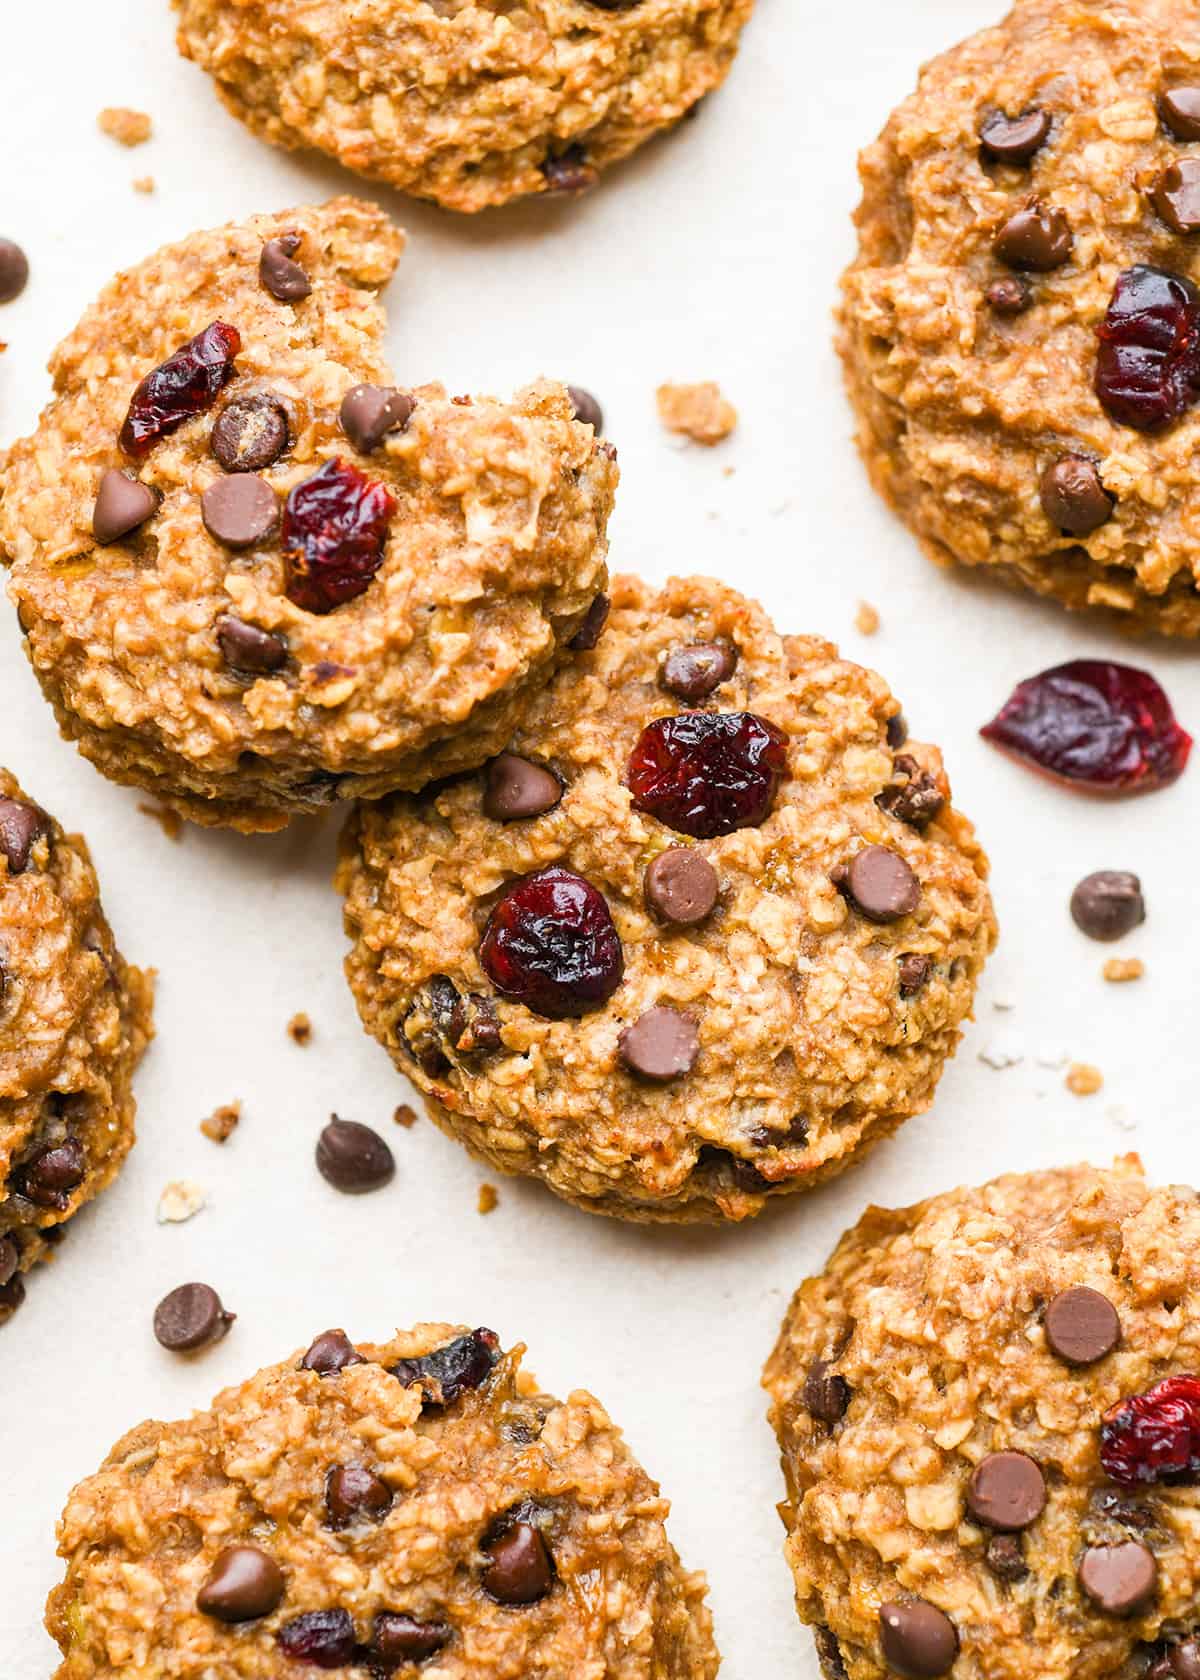 7 Breakfast Cookies with chocolate chips and dried cranberries, one with a bite taken out of it